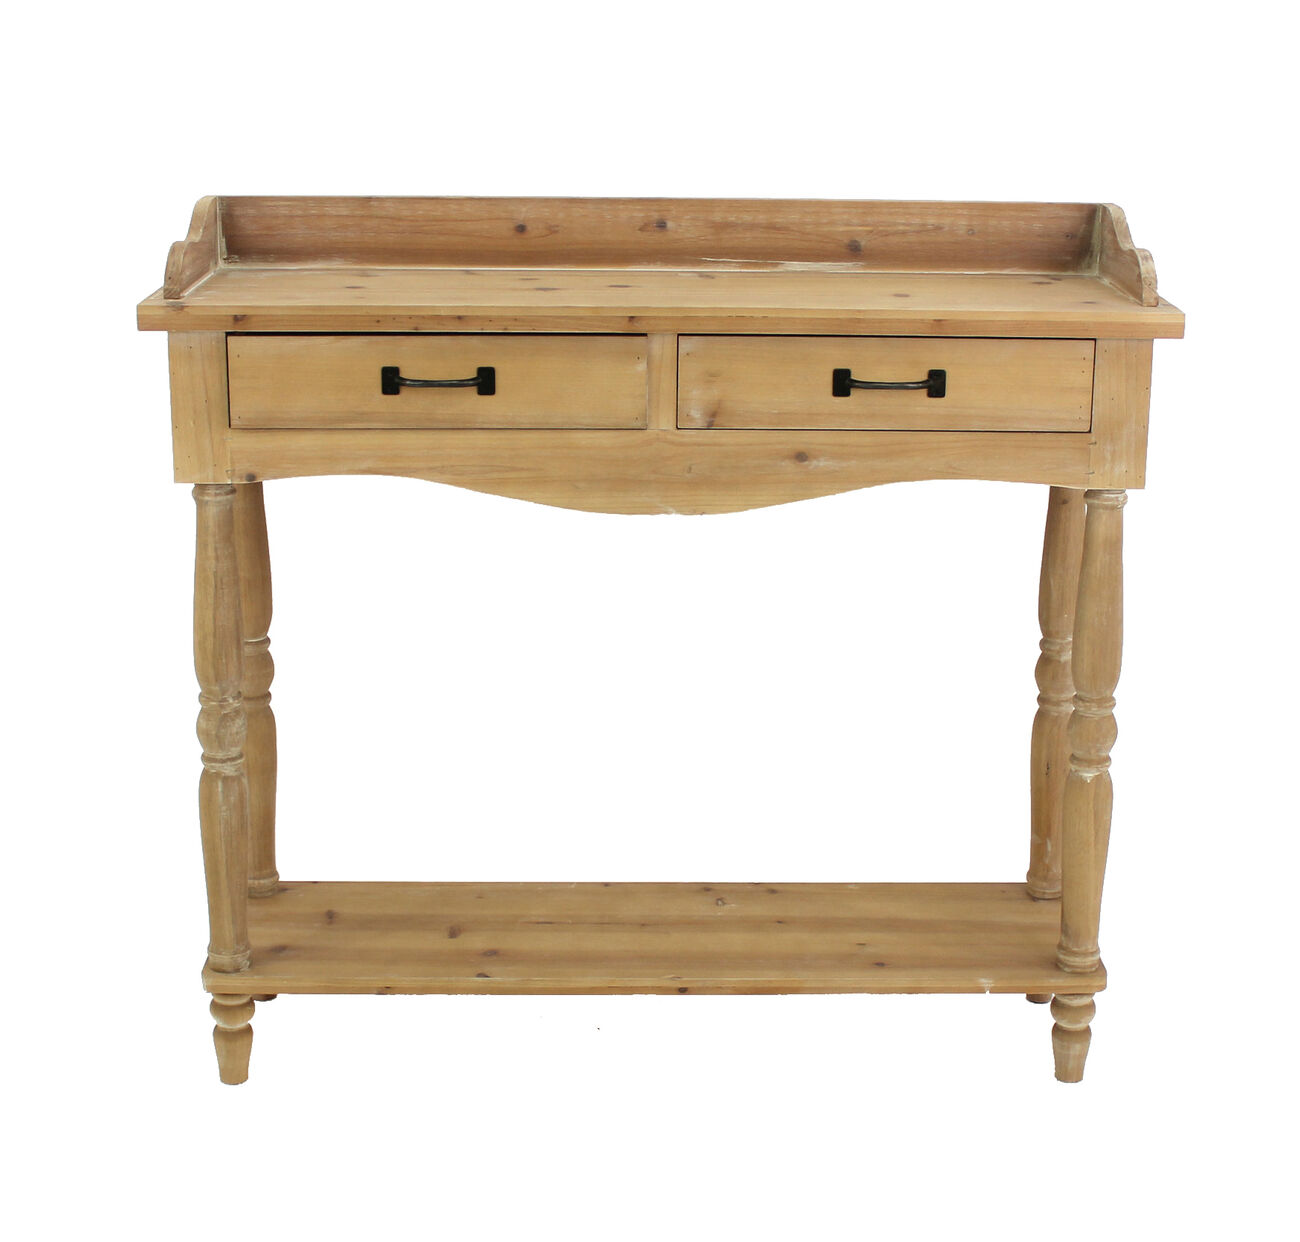 Rustic Style Wooden Dressing Table with 2 Drawers and Shelf, Brown